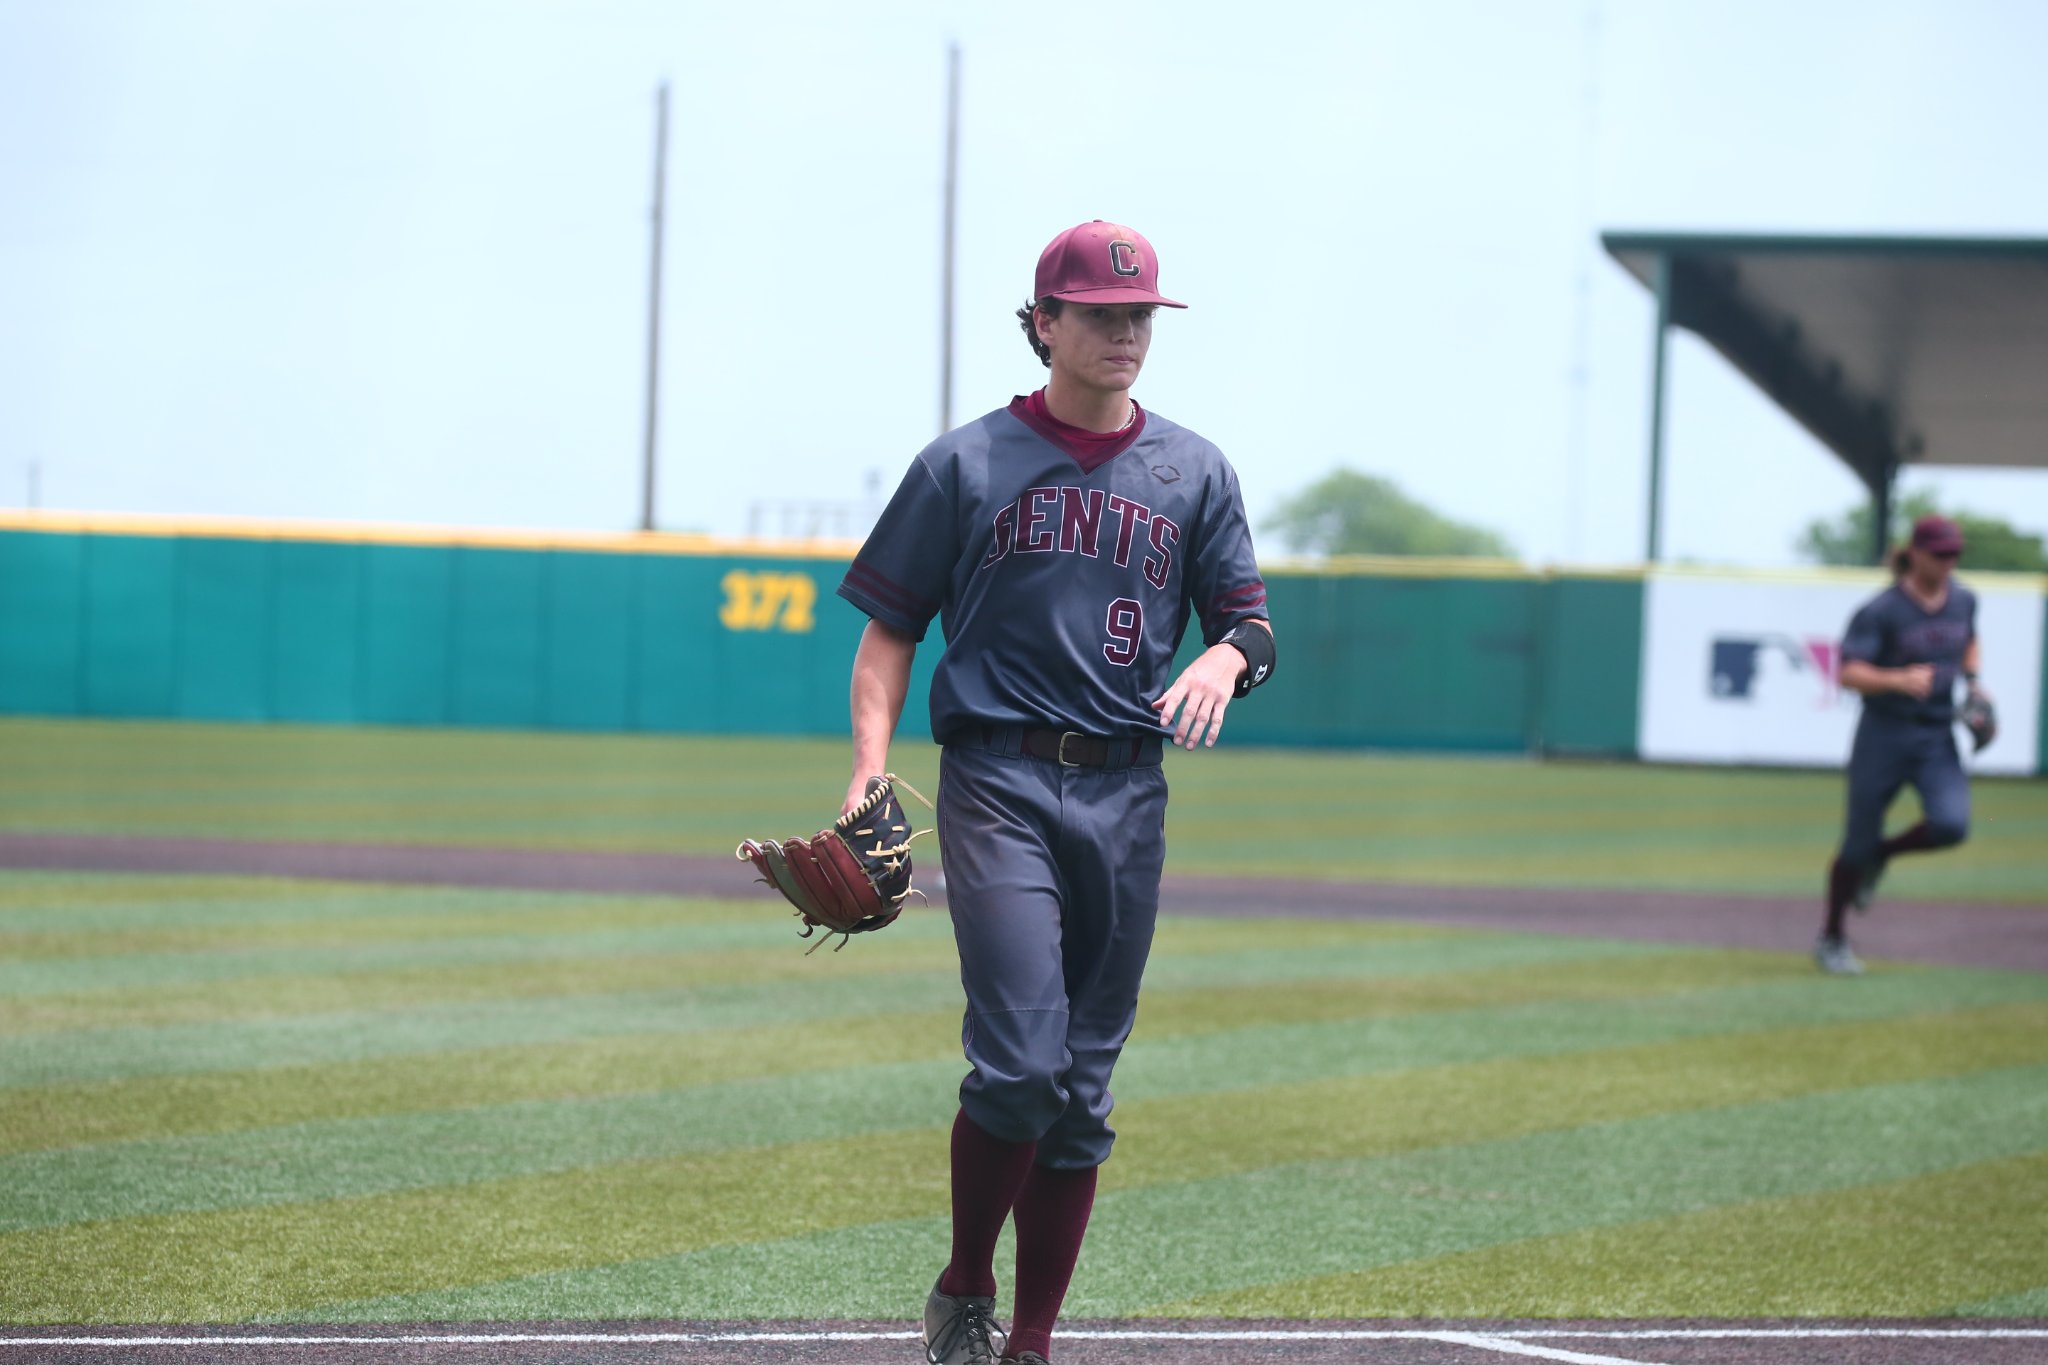 Senior RHP Parker Primeaux notched his 16th-career save in Centenary's 5-2 win.